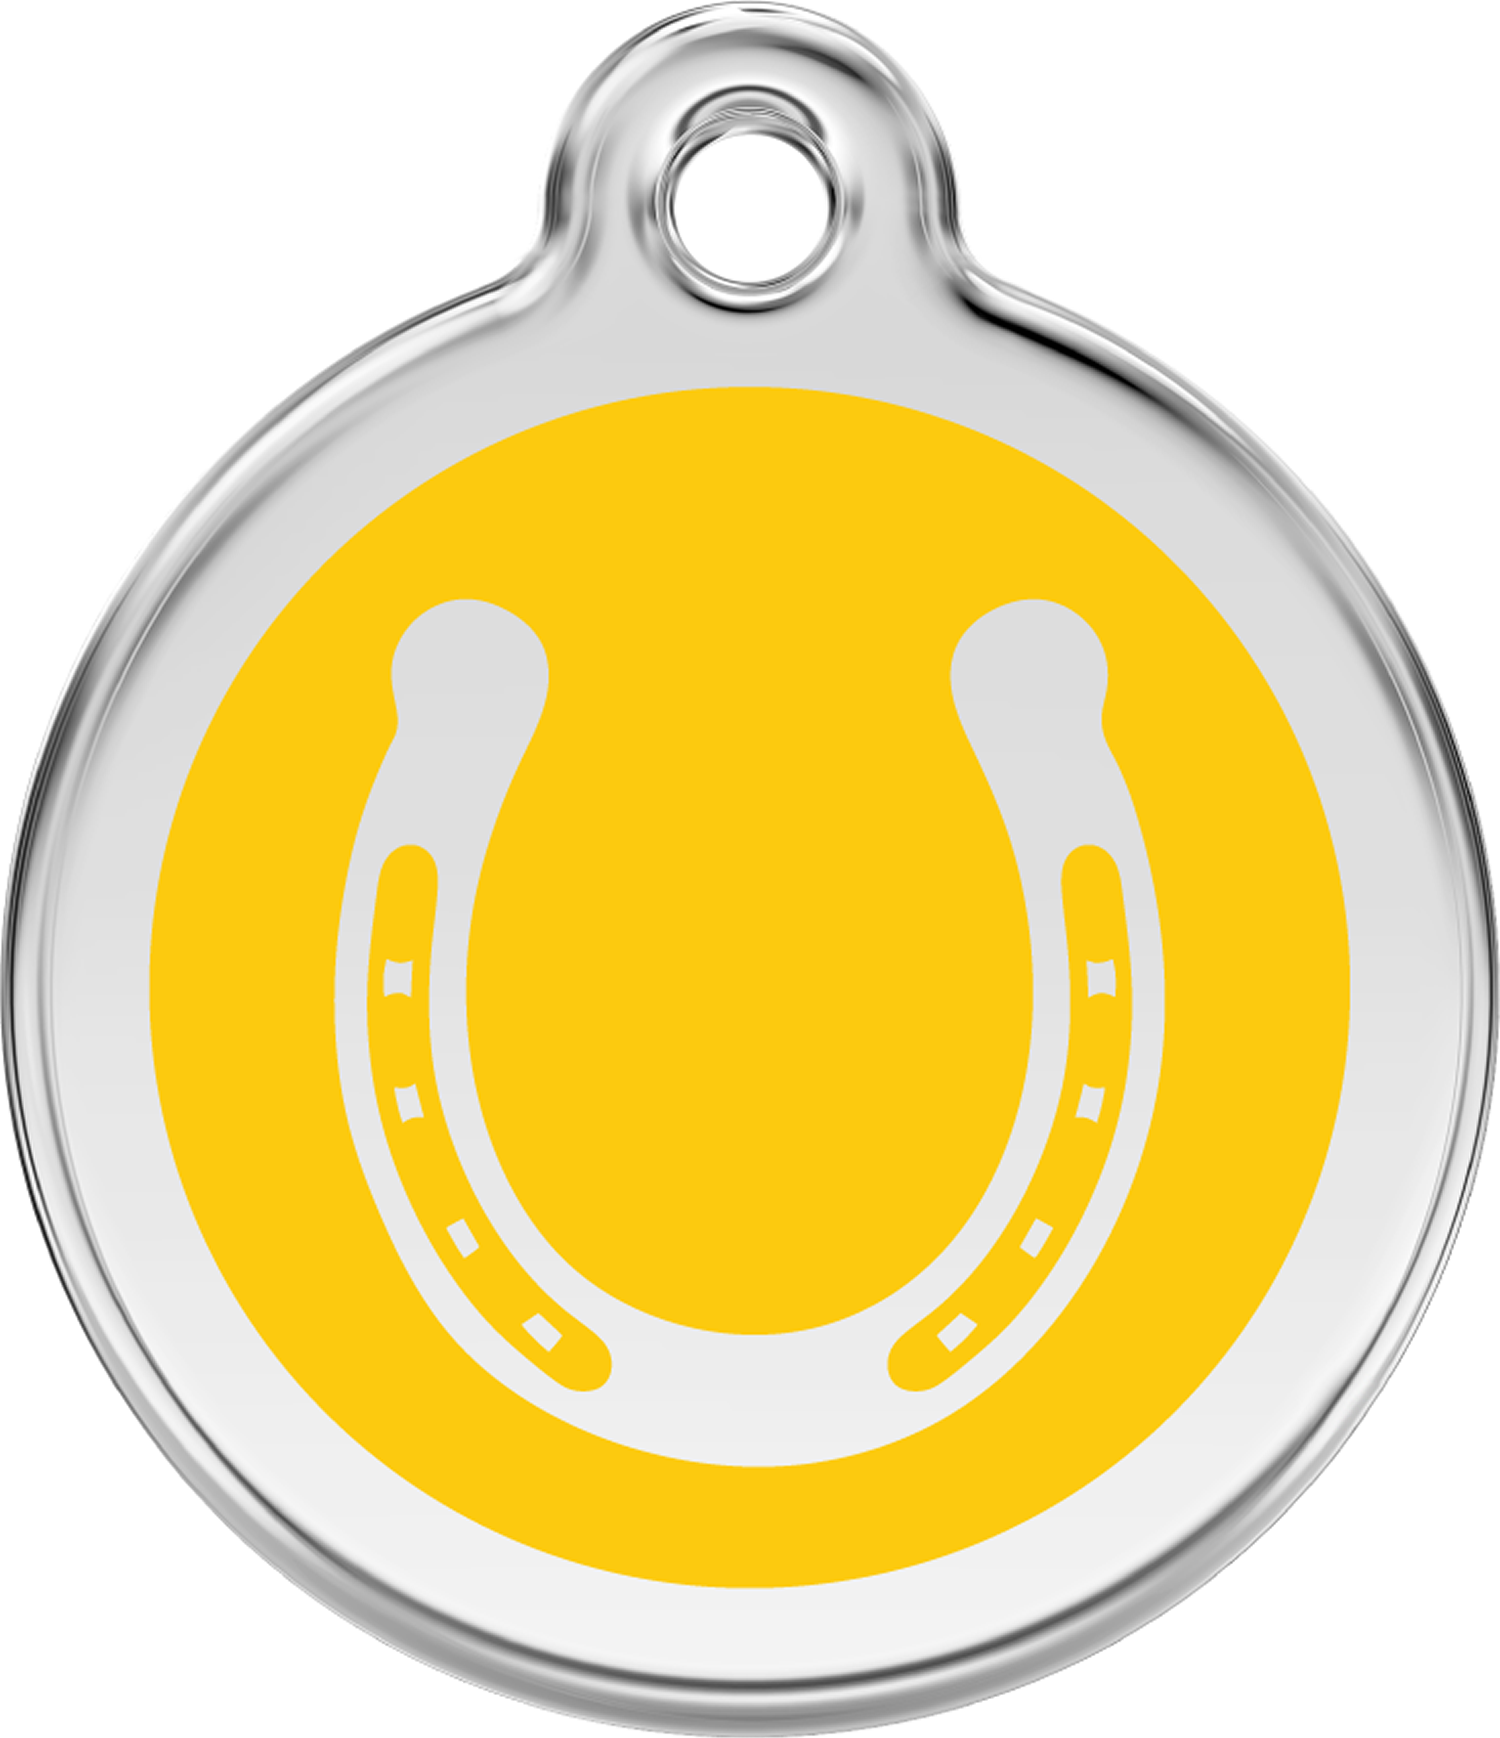 1hsym, 9330725042735, Image - Personalized Stainless Steel & Enamel Dog Tag (1500x1738)